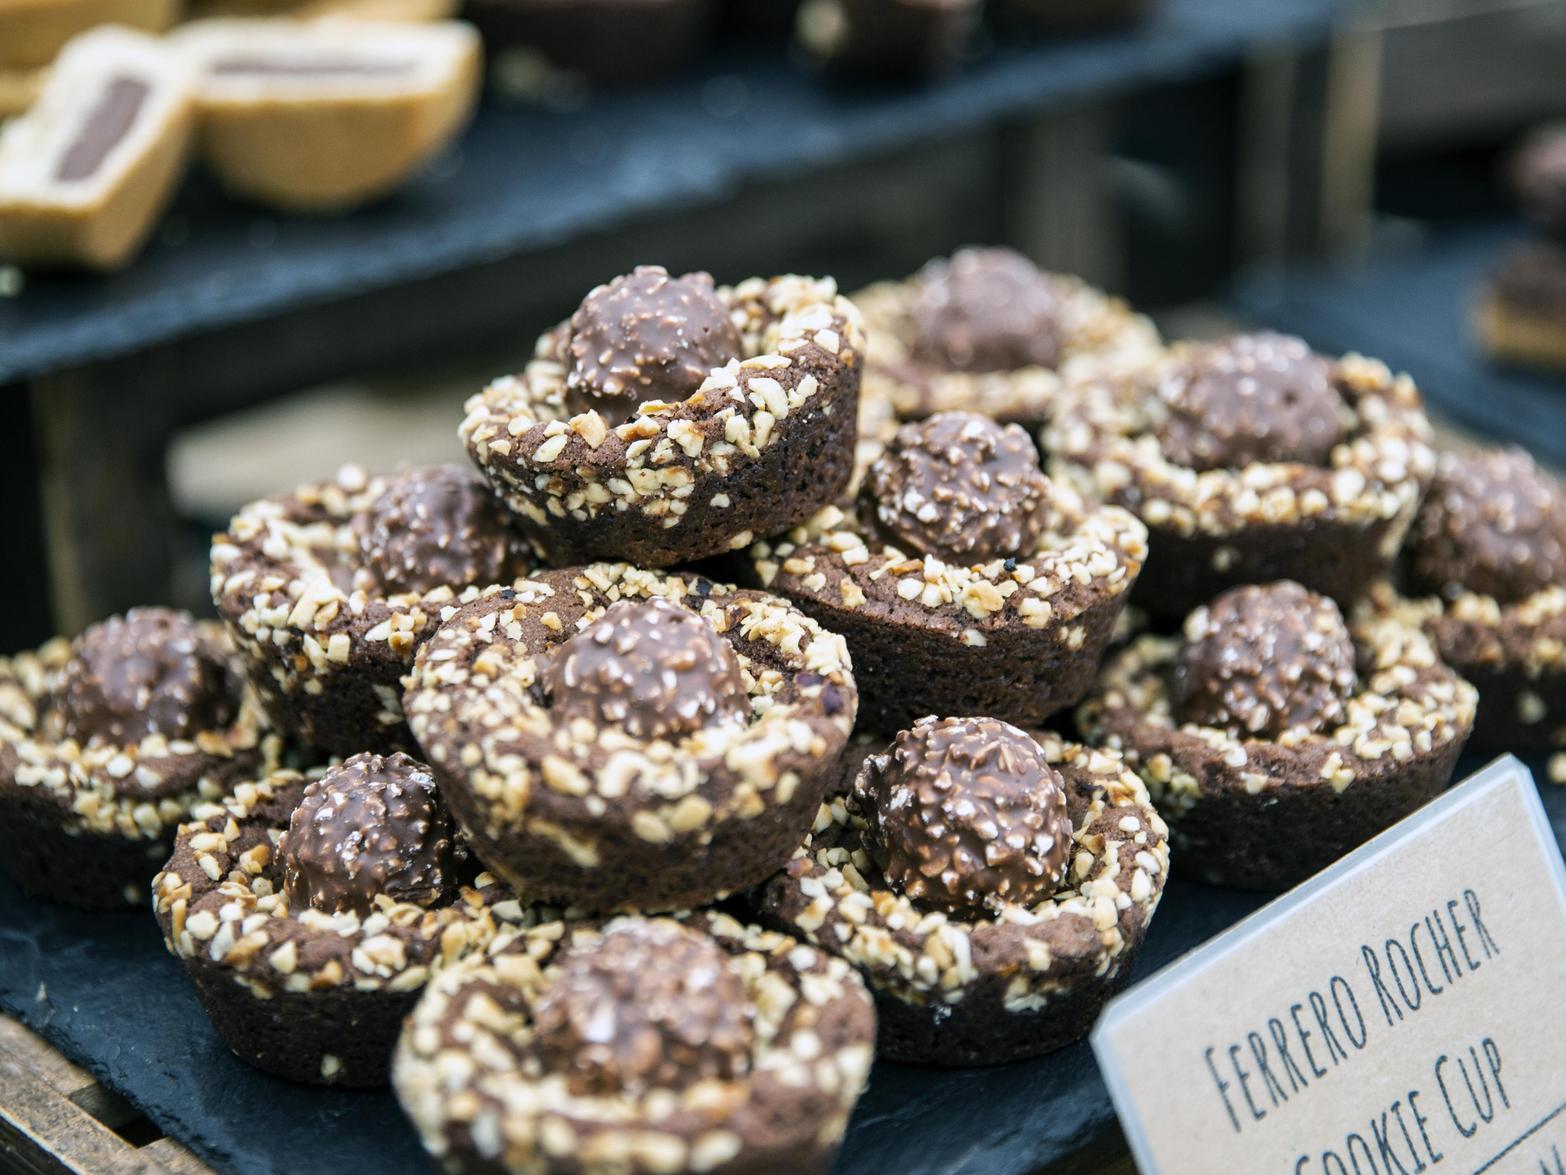 A Ferrero Rocher Cookie Cup by the Thomas Cookie Co.